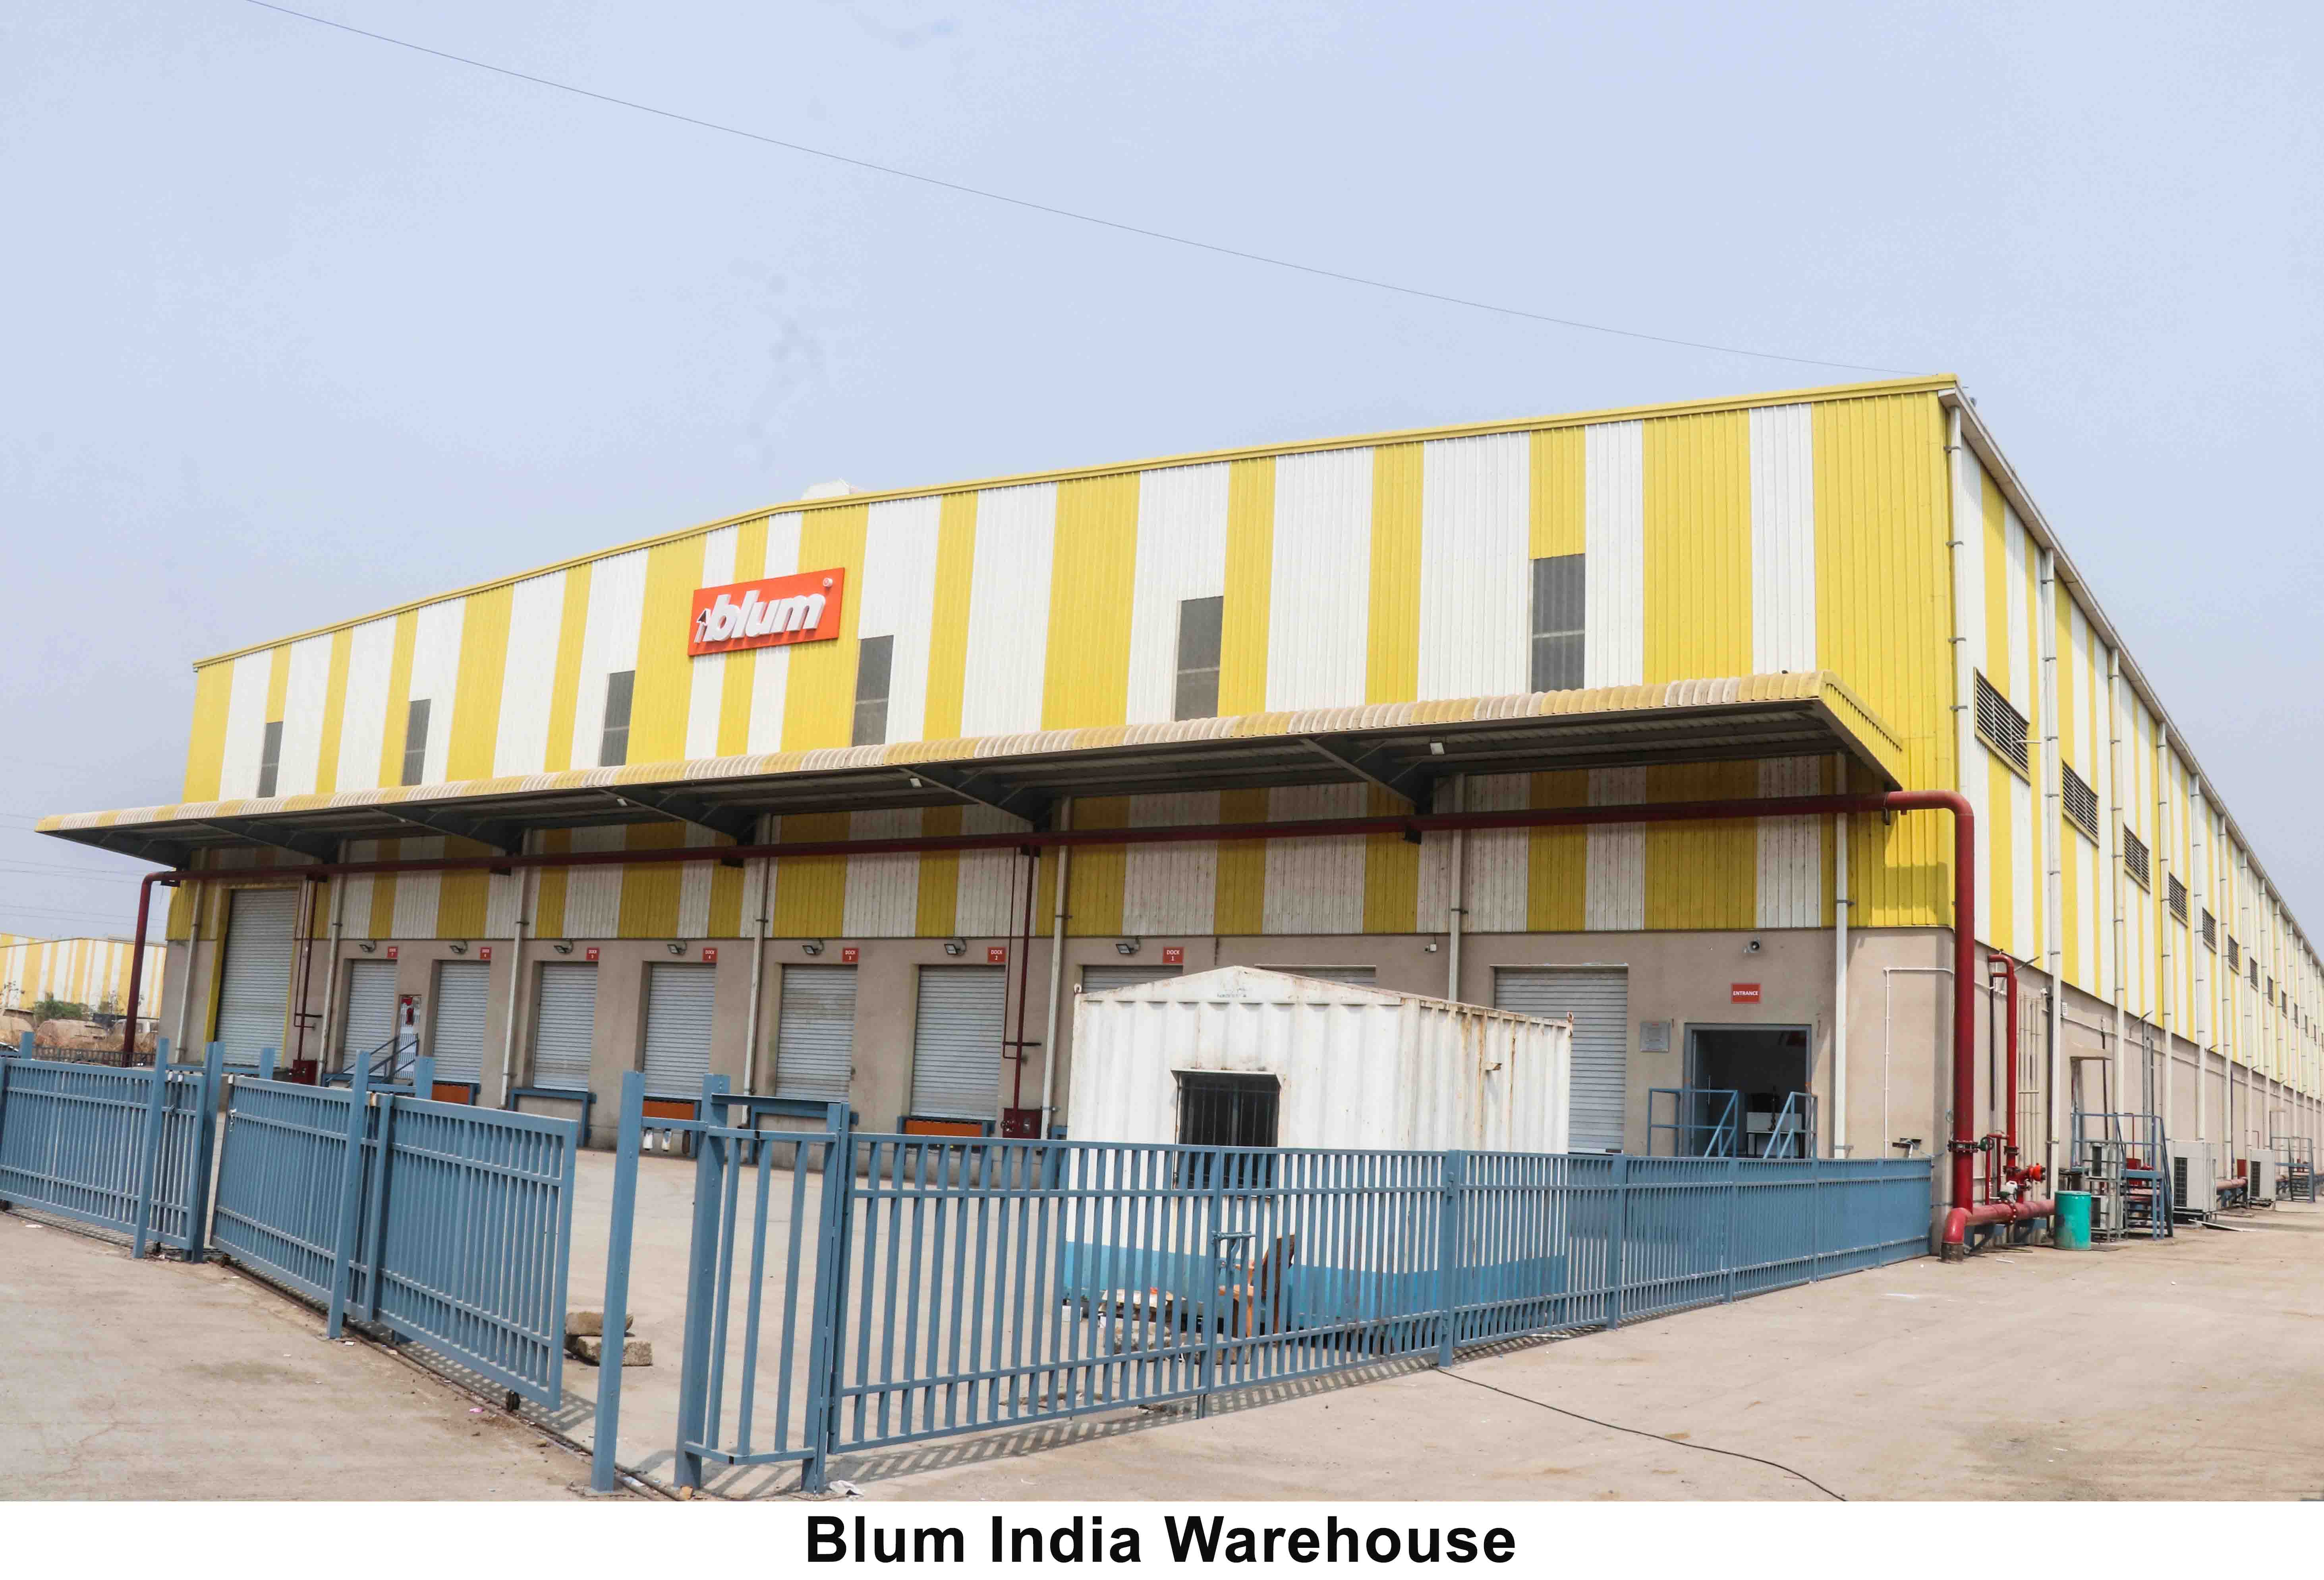 Blum’s Opens 1 Lakh Sq Ft Warehouse in India